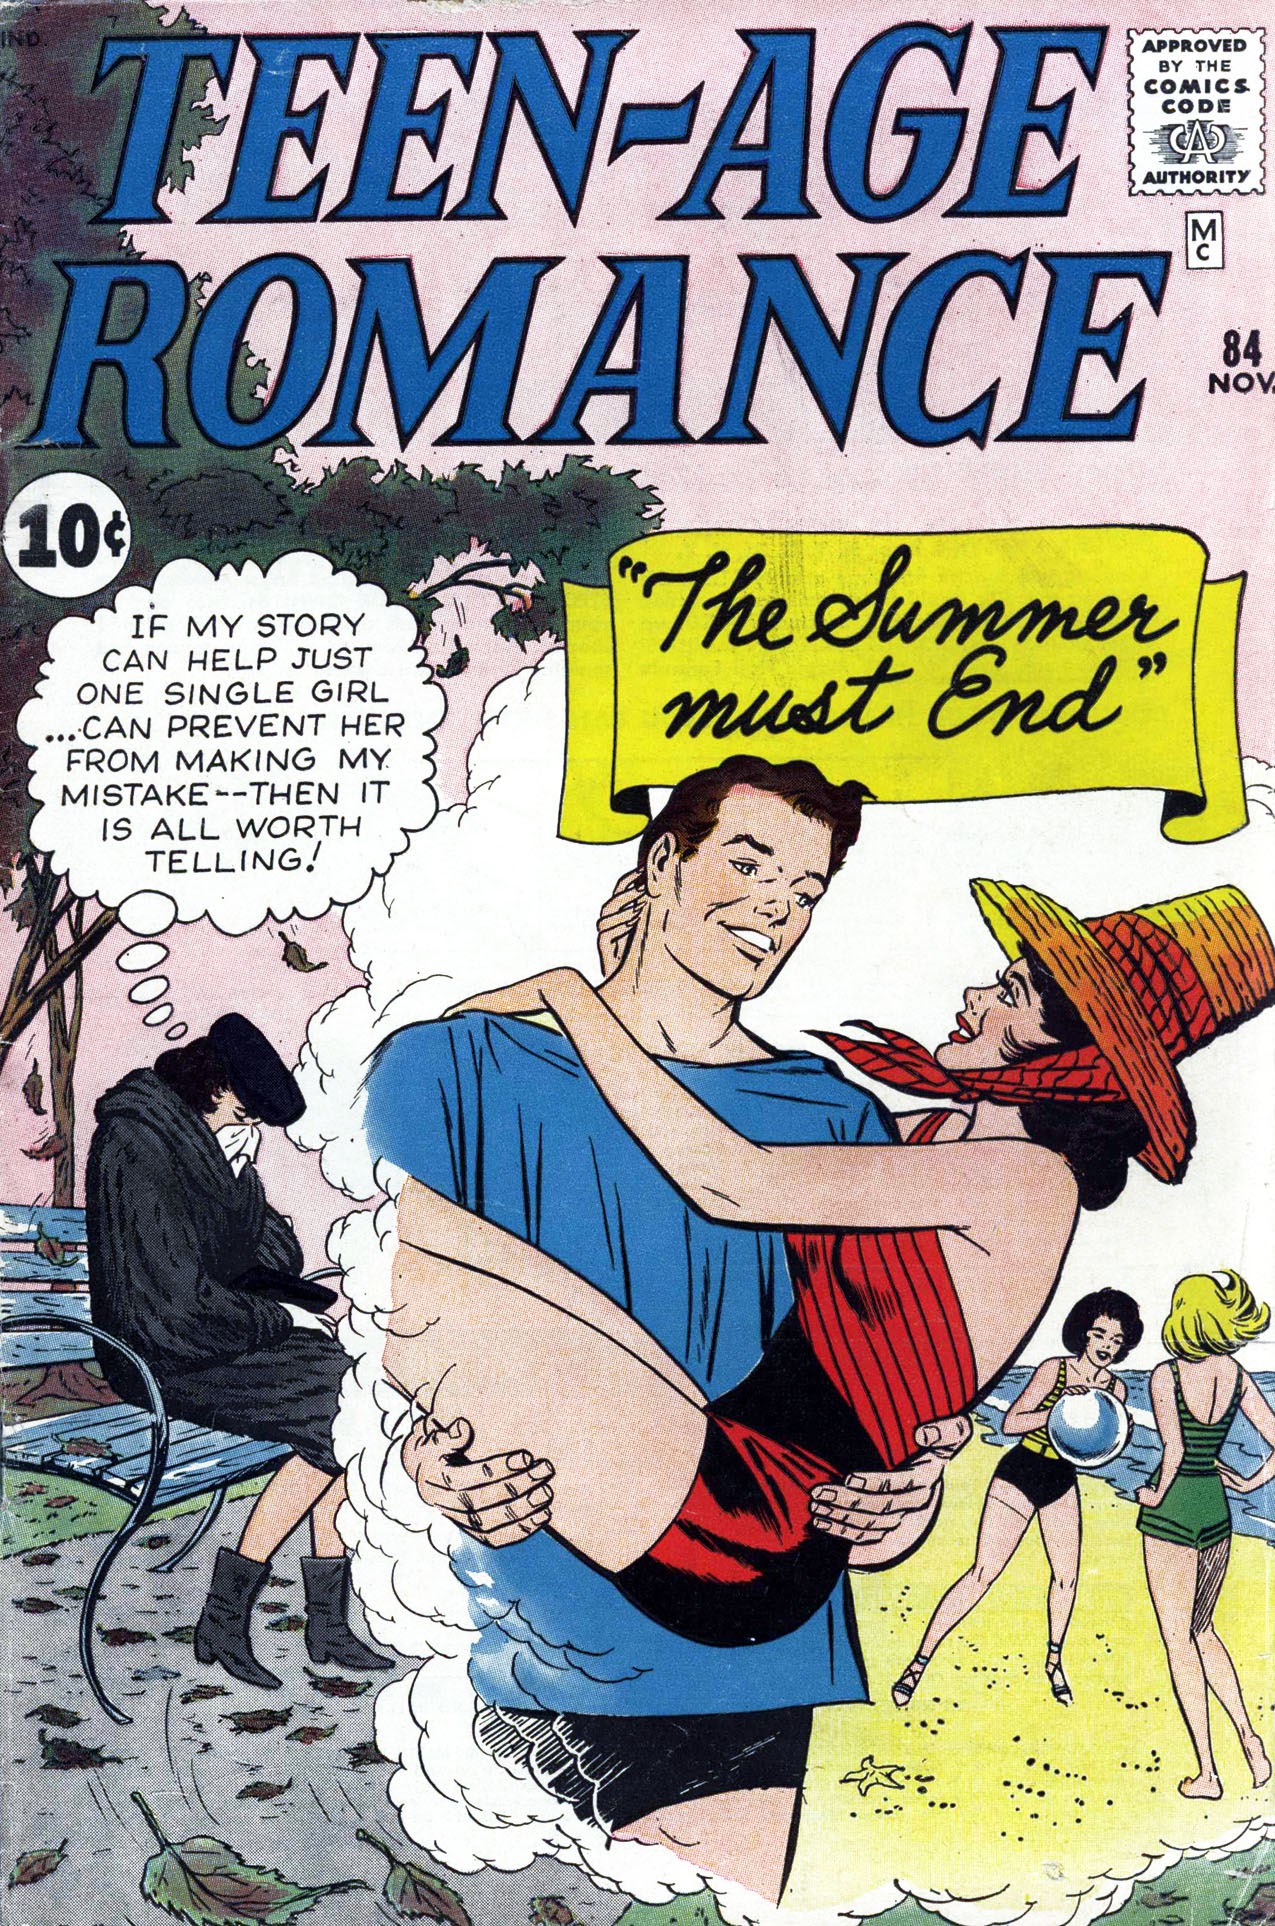 Read online Teen-Age Romance comic -  Issue #84 - 1